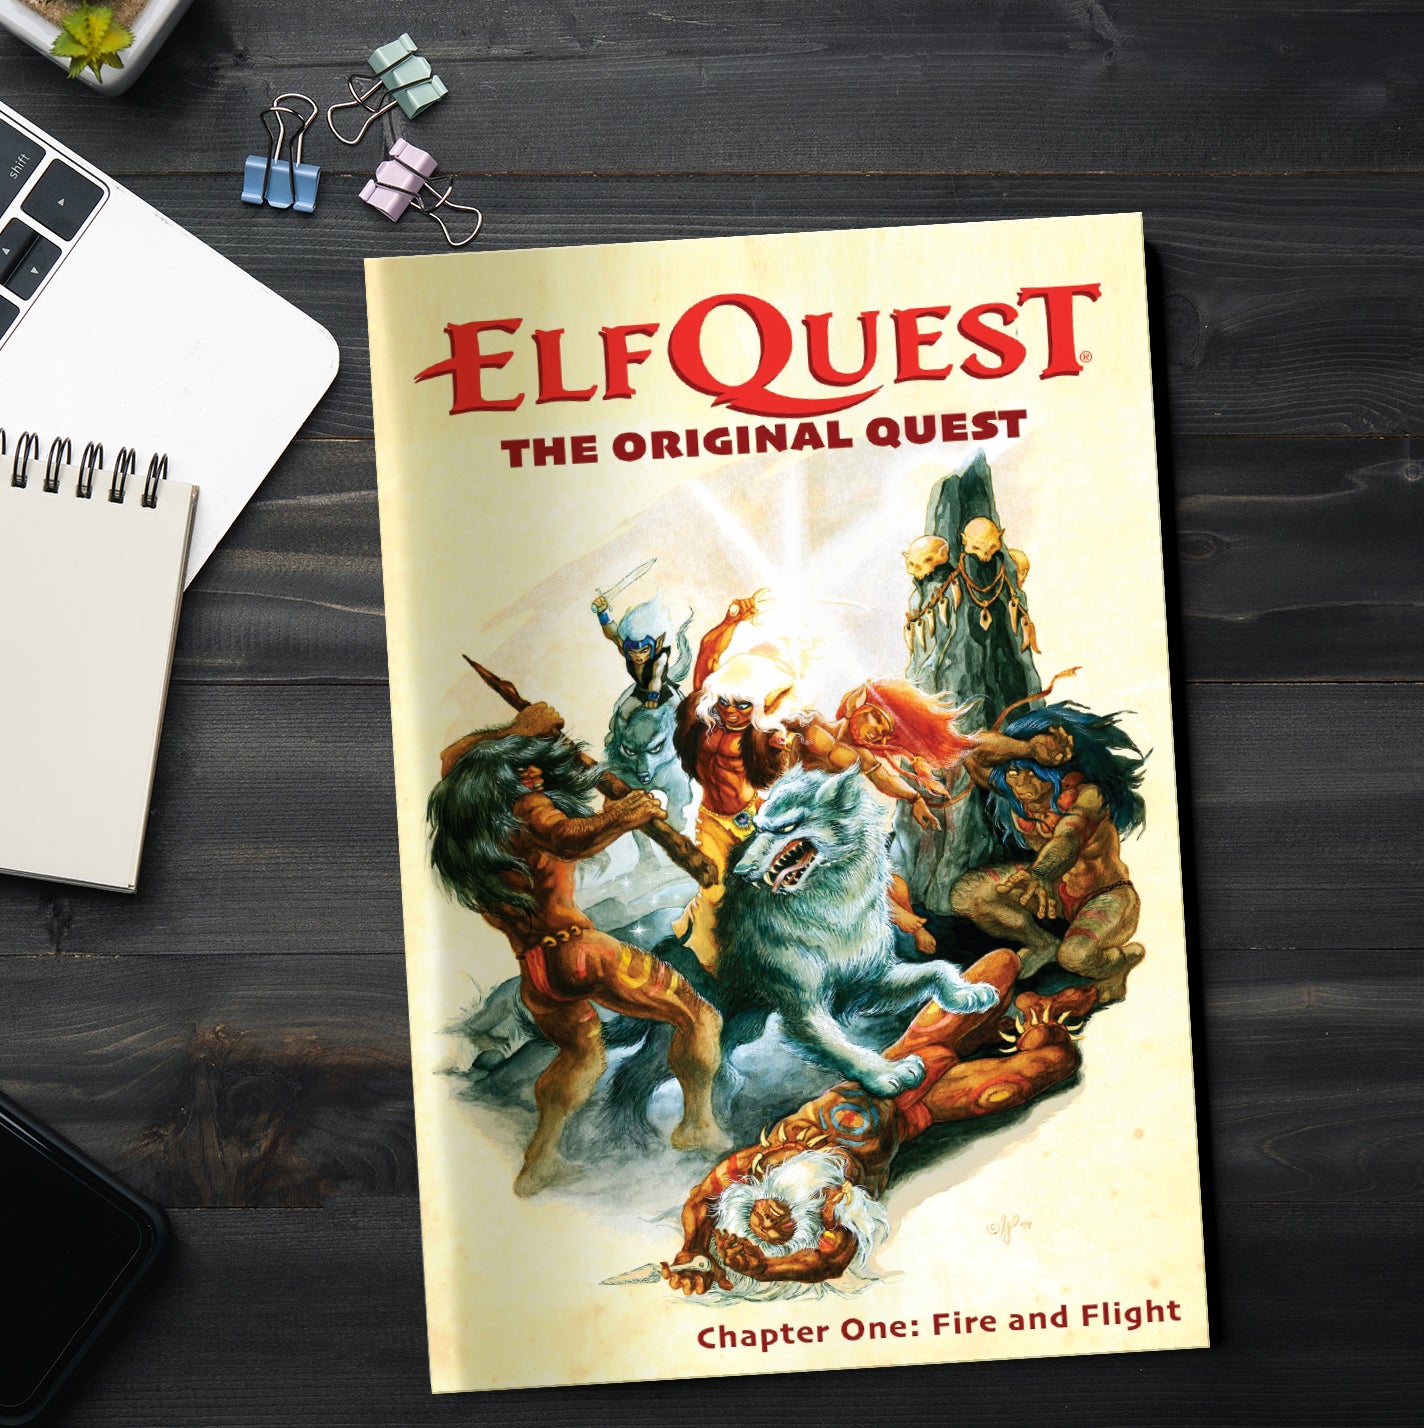 A copy of the comic book ElfQuest issue number one, on a wood desk. The cover depicts various armed elves in combat. Next to the comis is a laptop computer, a notepad, a cell phone, and paperclips.